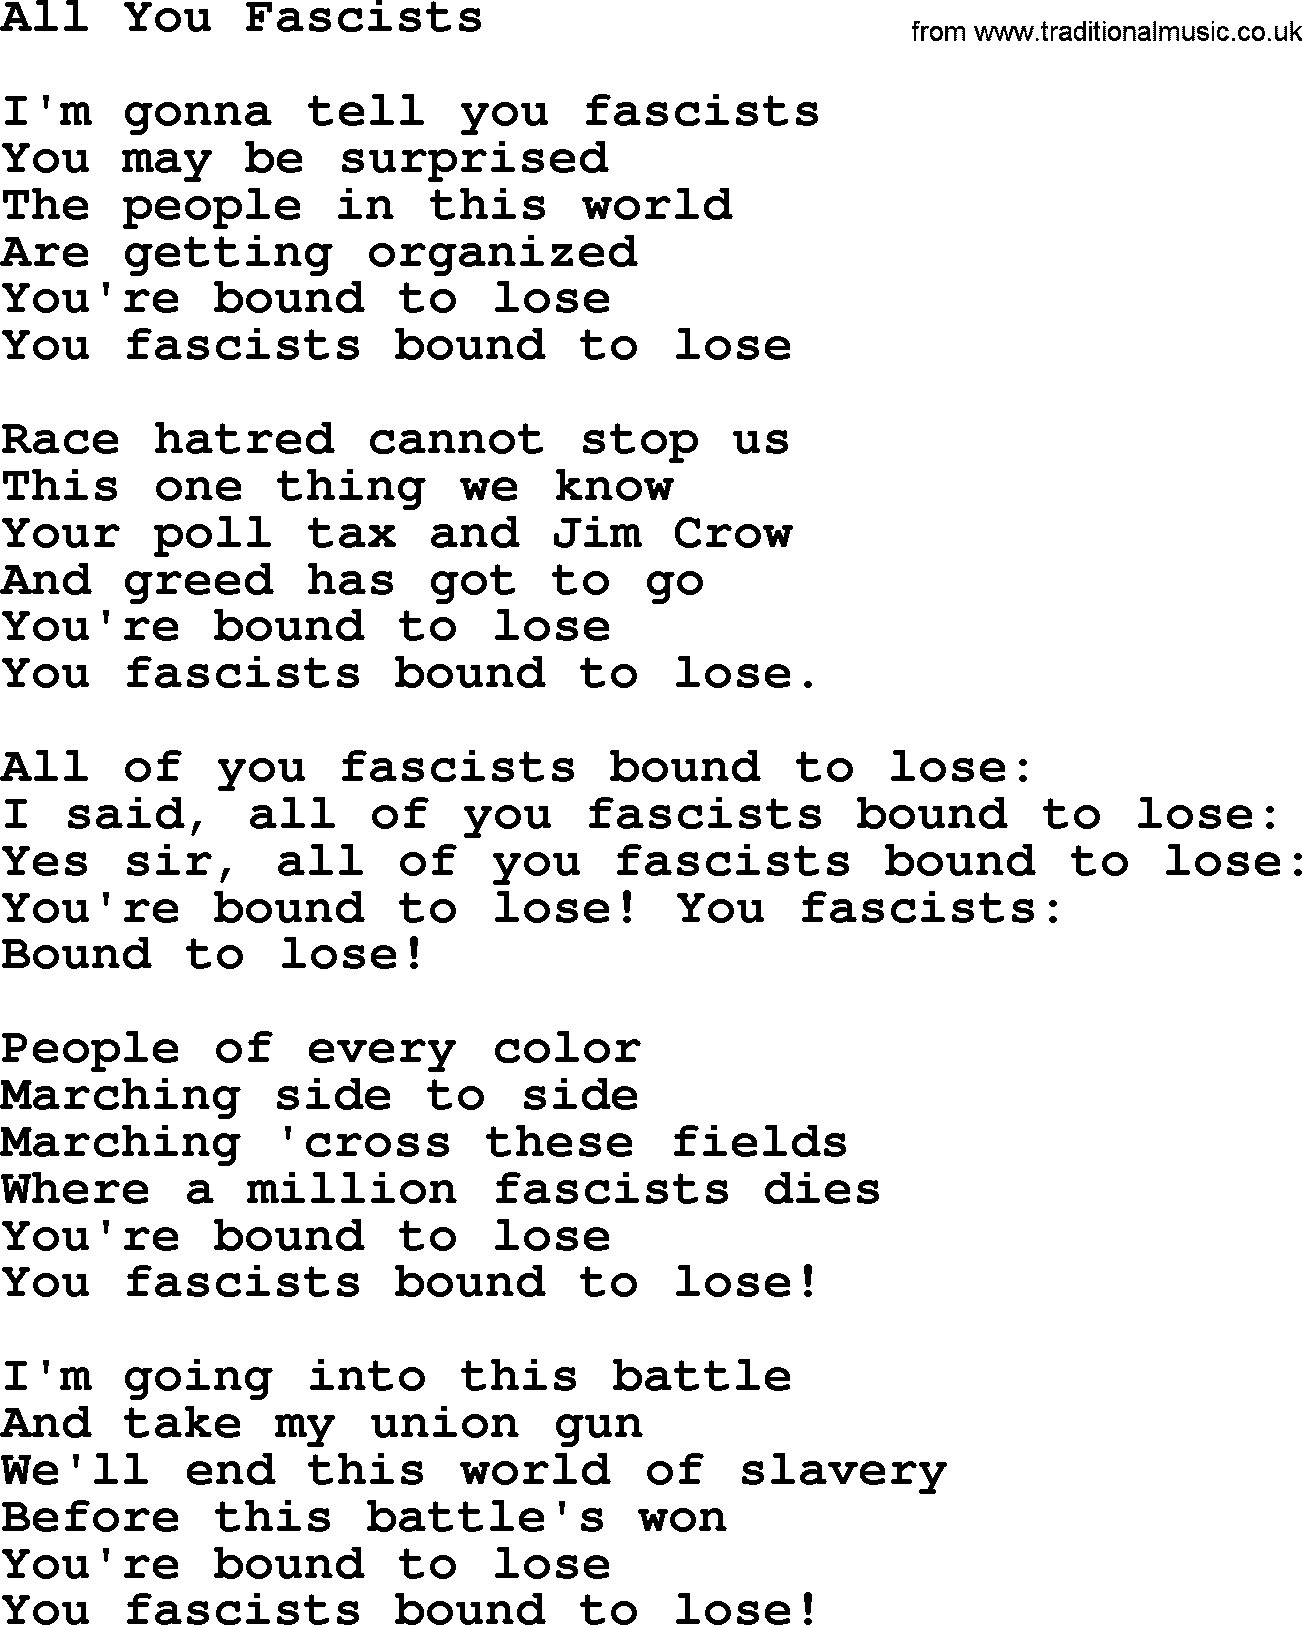 Woody Guthrie song All You Fascists lyrics